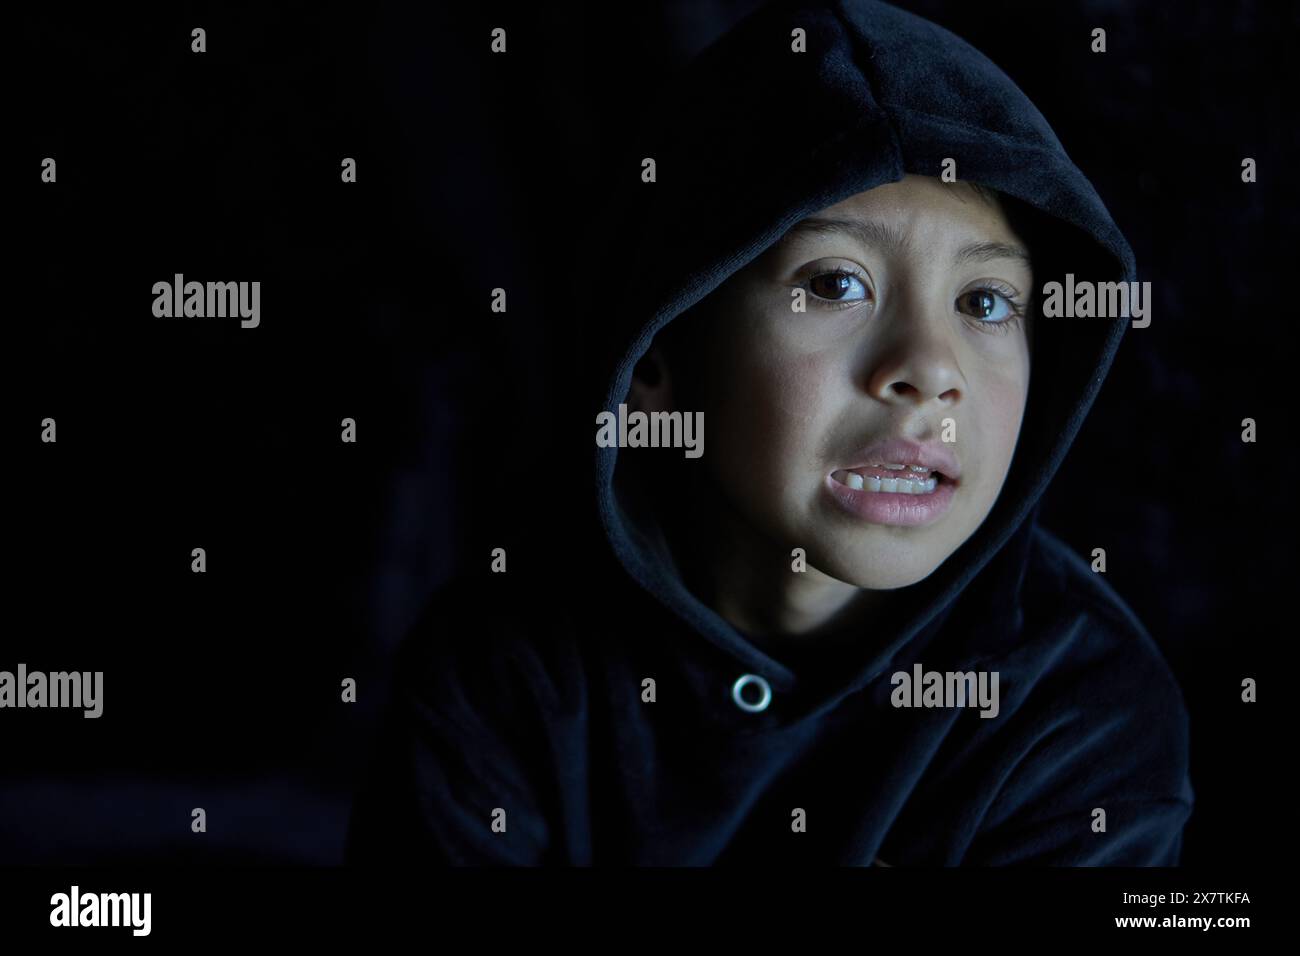 latino boy with black hood on his head and a confused expression on his face, black background Stock Photo